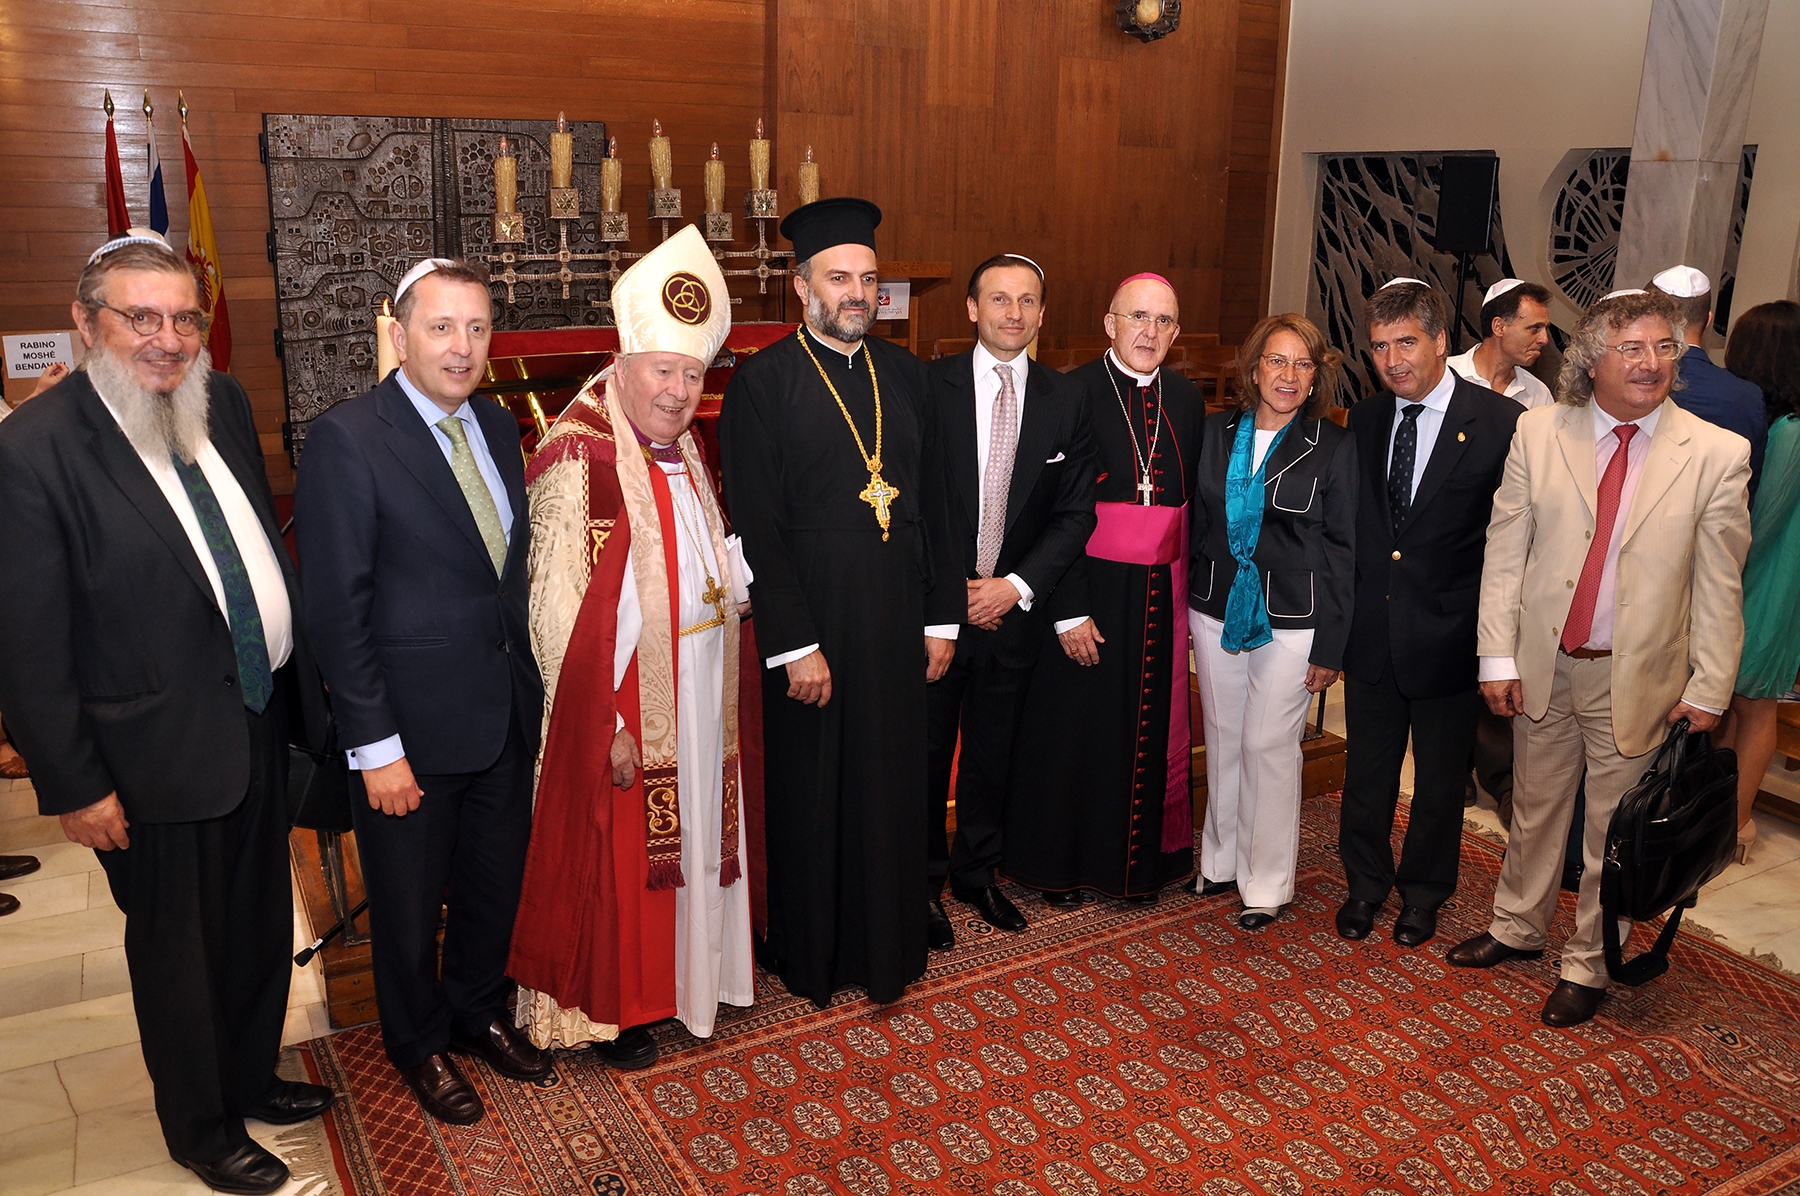 Participants at the meeting in support of the persecuted Christians